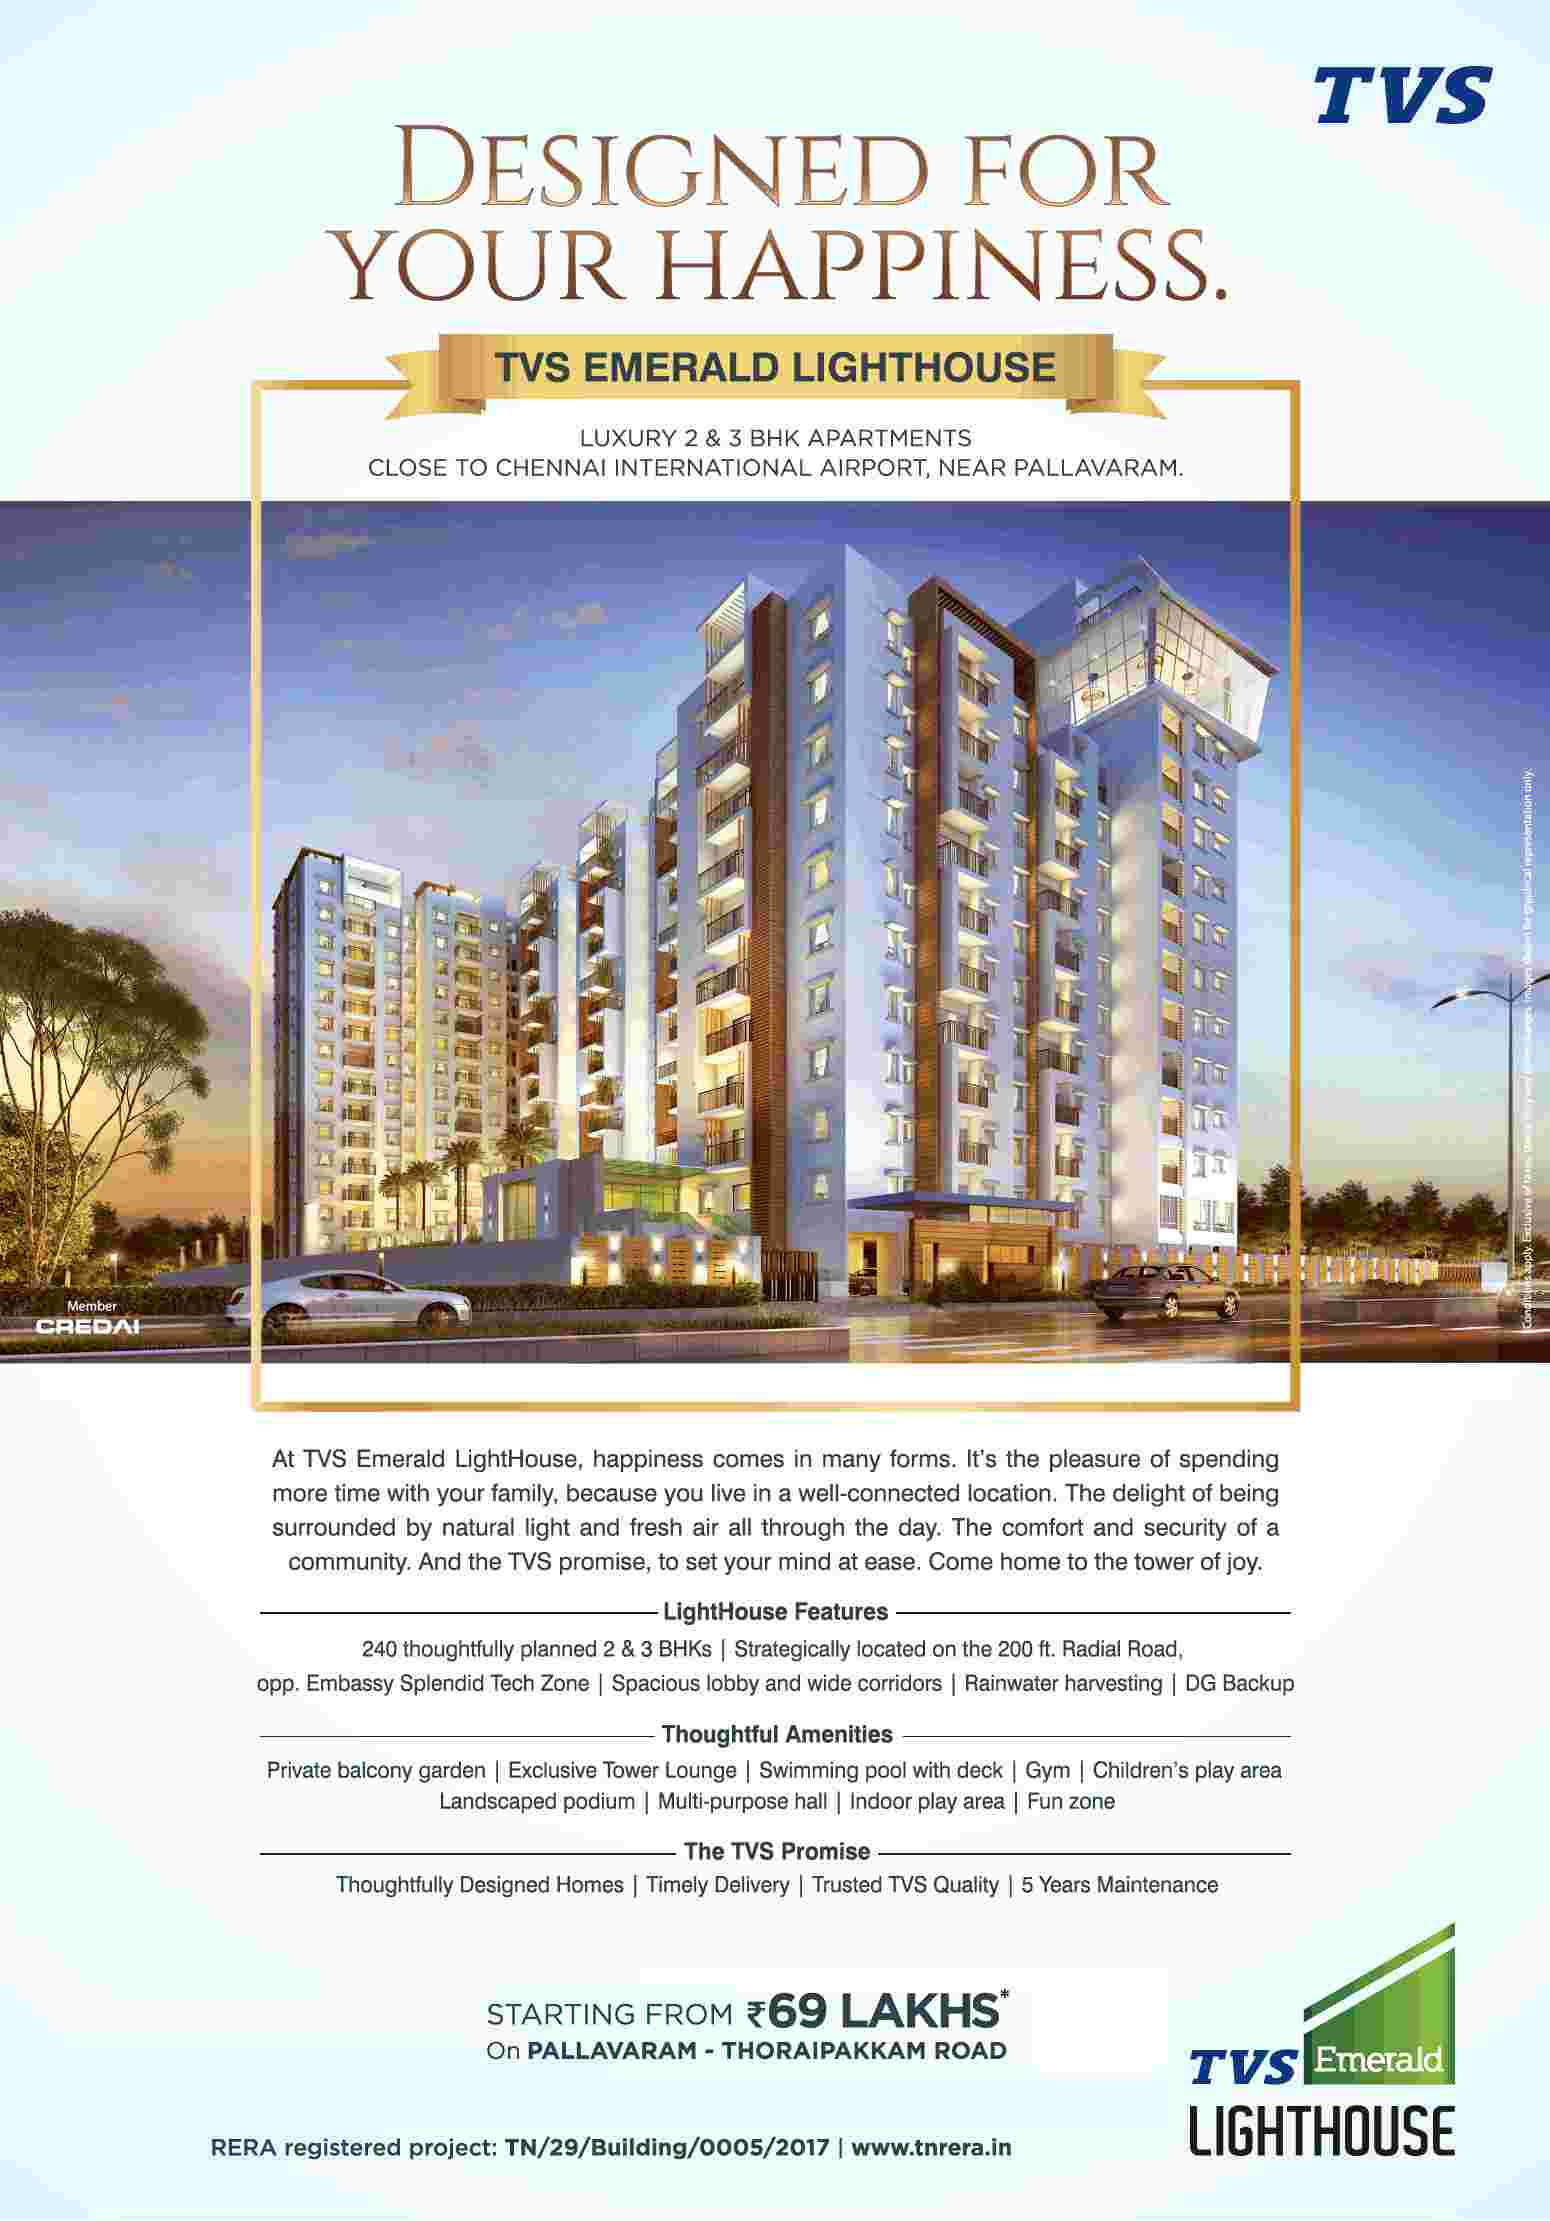 Luxury homes designed for your happiness at TVS Emerald LightHouse in Chennai Update